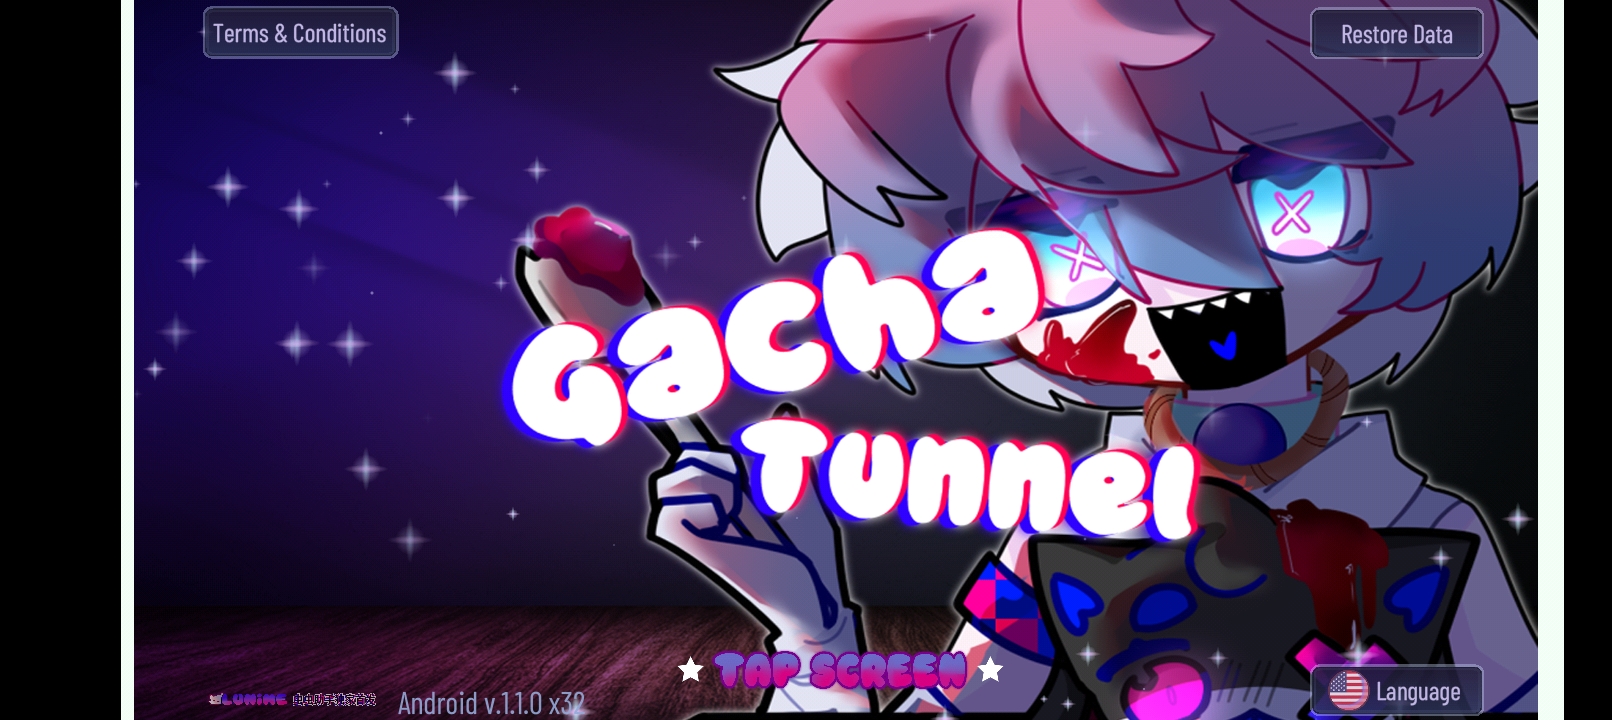 Gacha Art! (Deleted Mod and its not mine its by Rima_Katsu) - release date,  videos, screenshots, reviews on RAWG